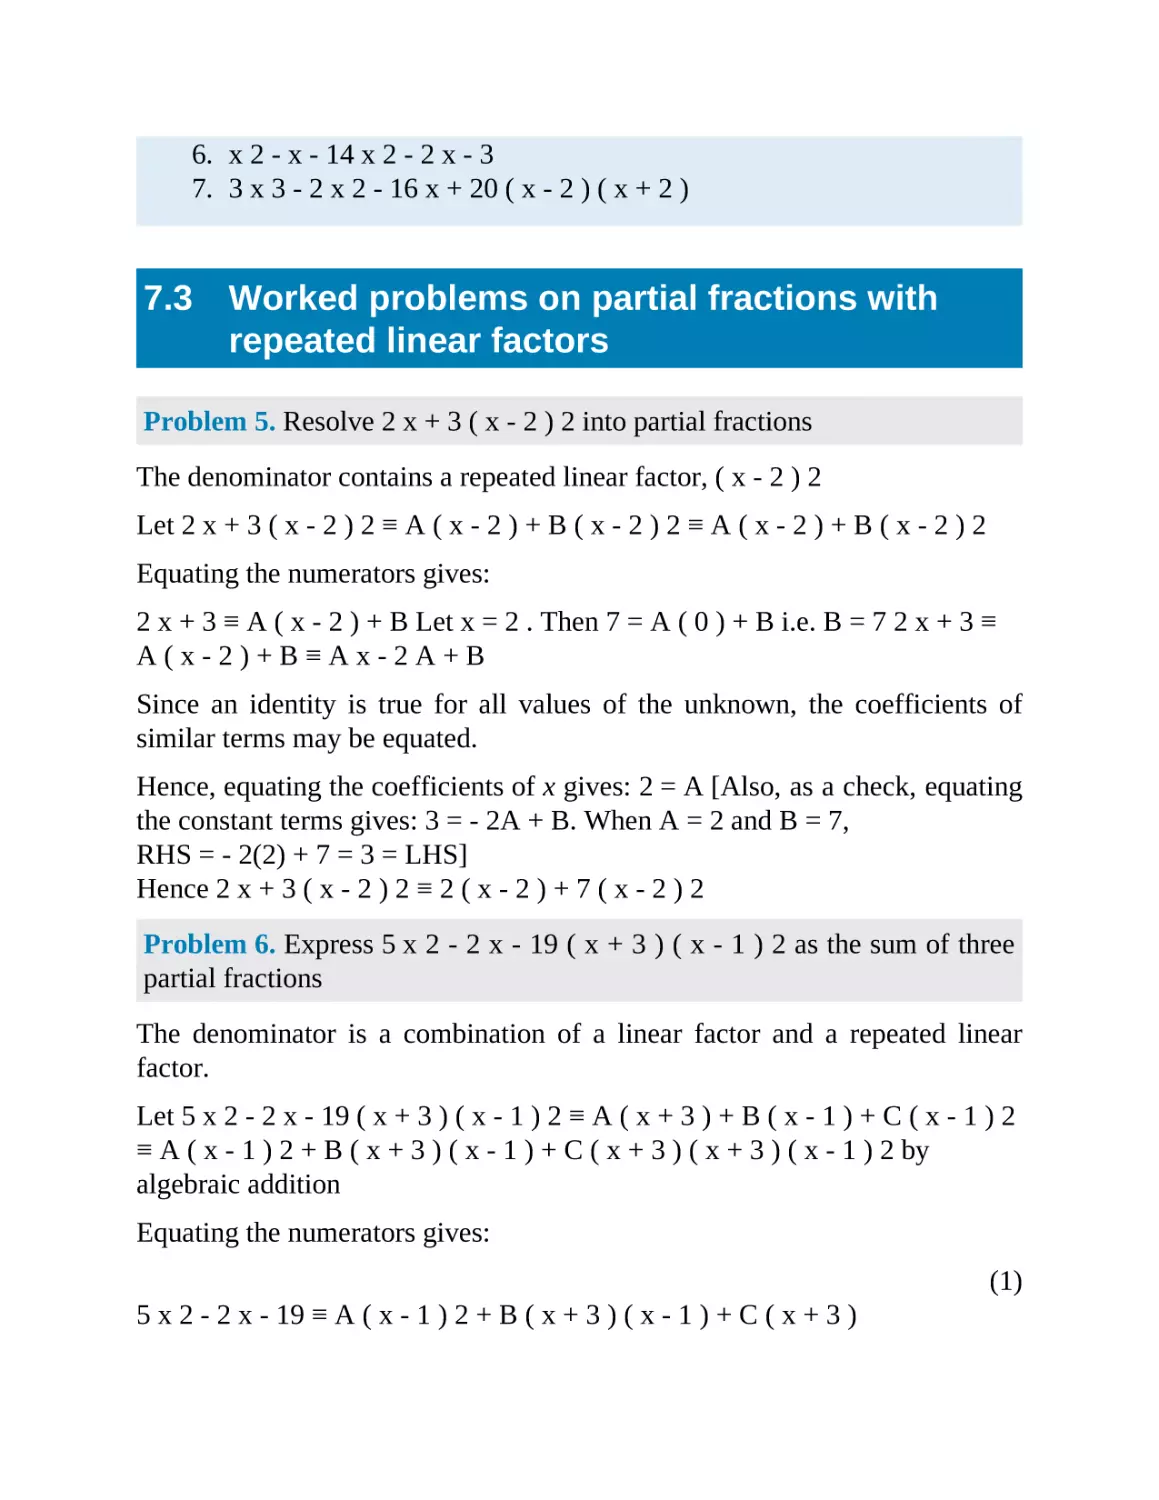 7.3 Worked problems on partial fractions with repeated linear factors